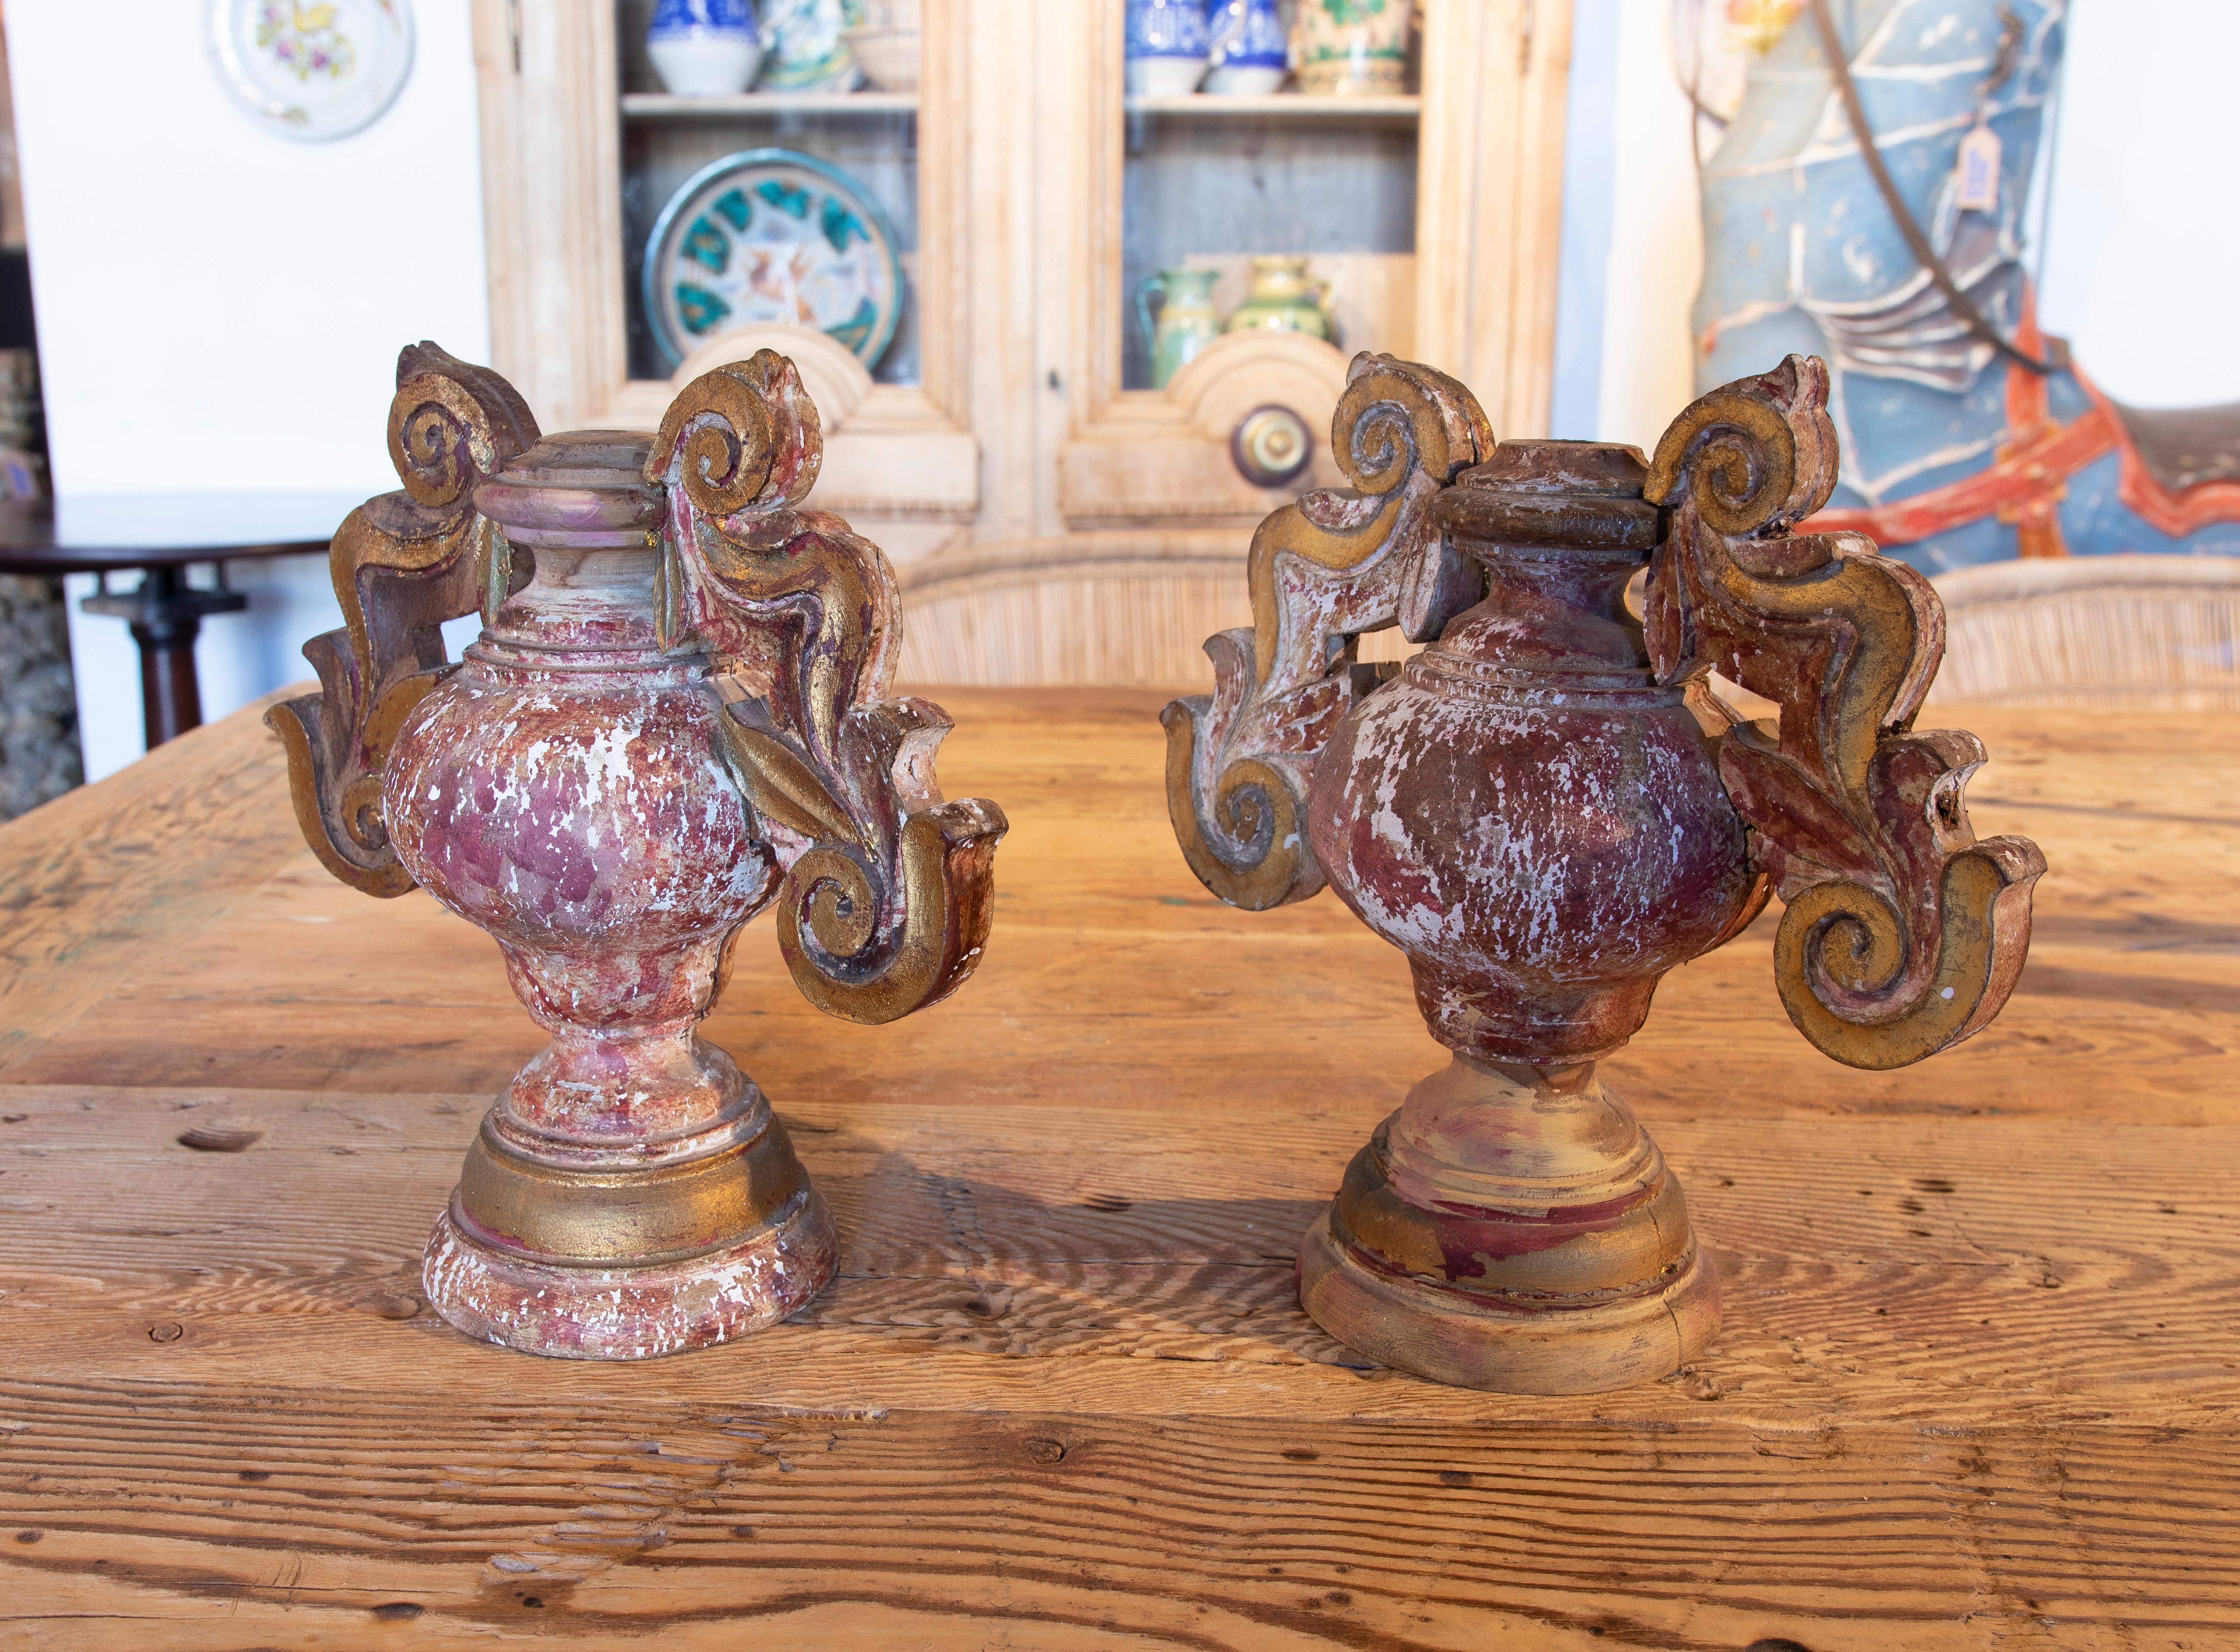 19th century pair of hand painted wooden finials in the shape of a vase with handles.